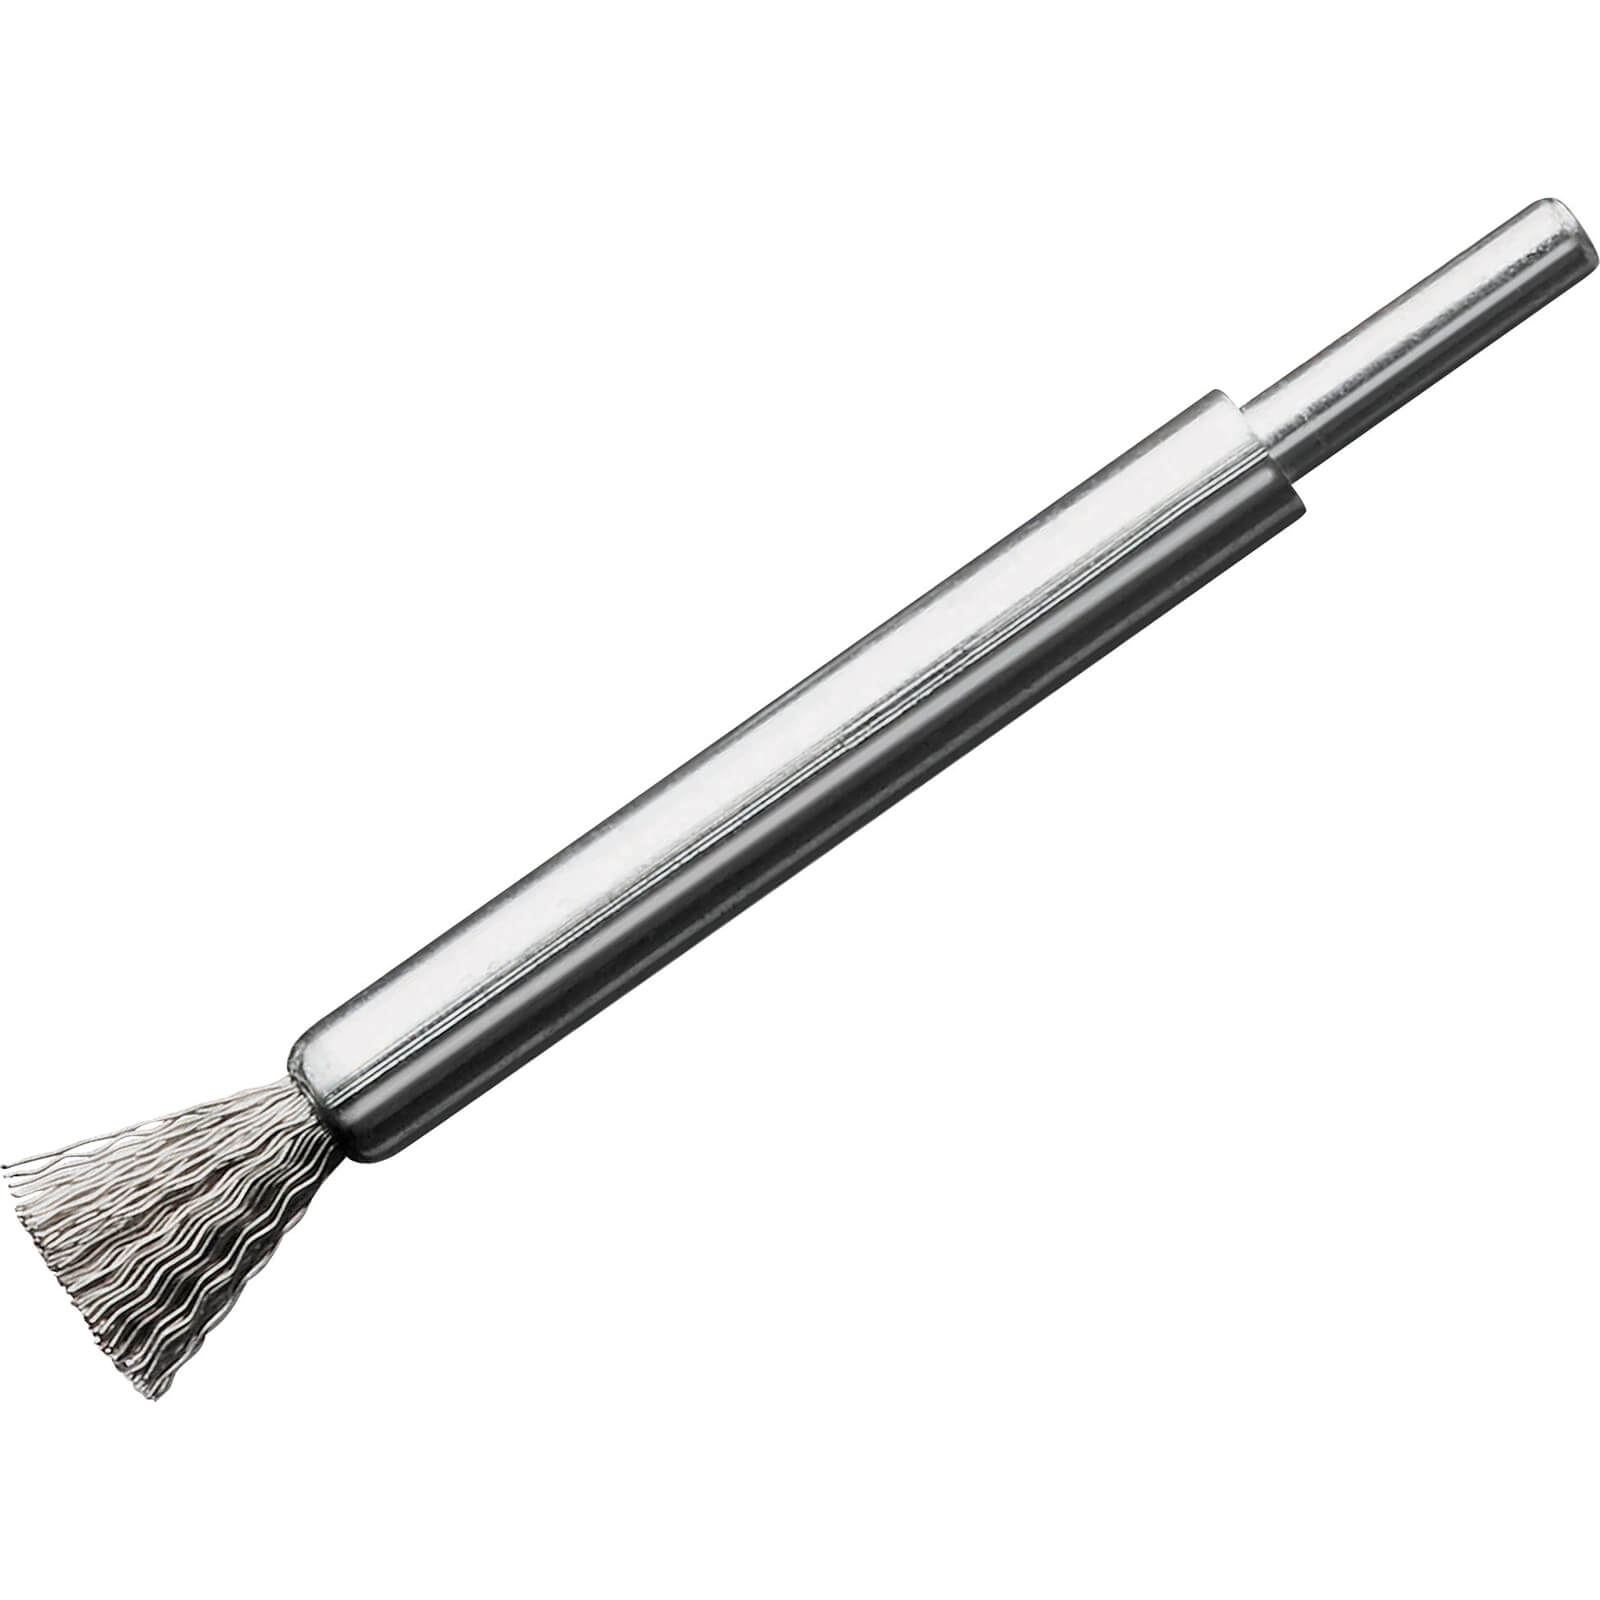 Image of Lessmann Precision End Wire Brush 12mm 6mm Shank